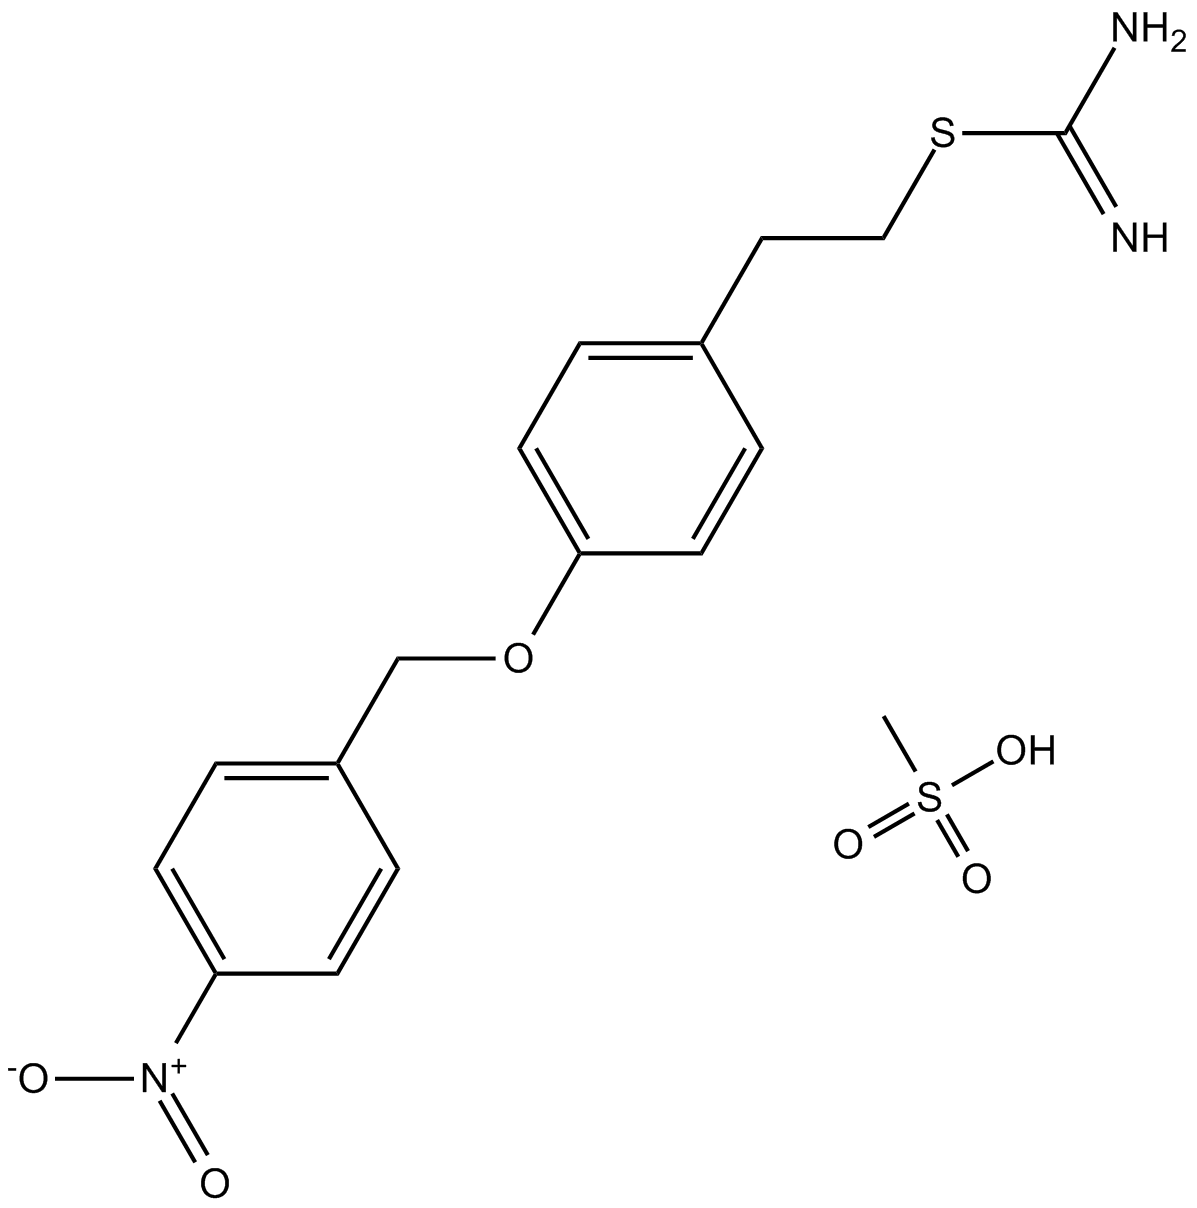 KB-R7943 mesylate  Chemical Structure